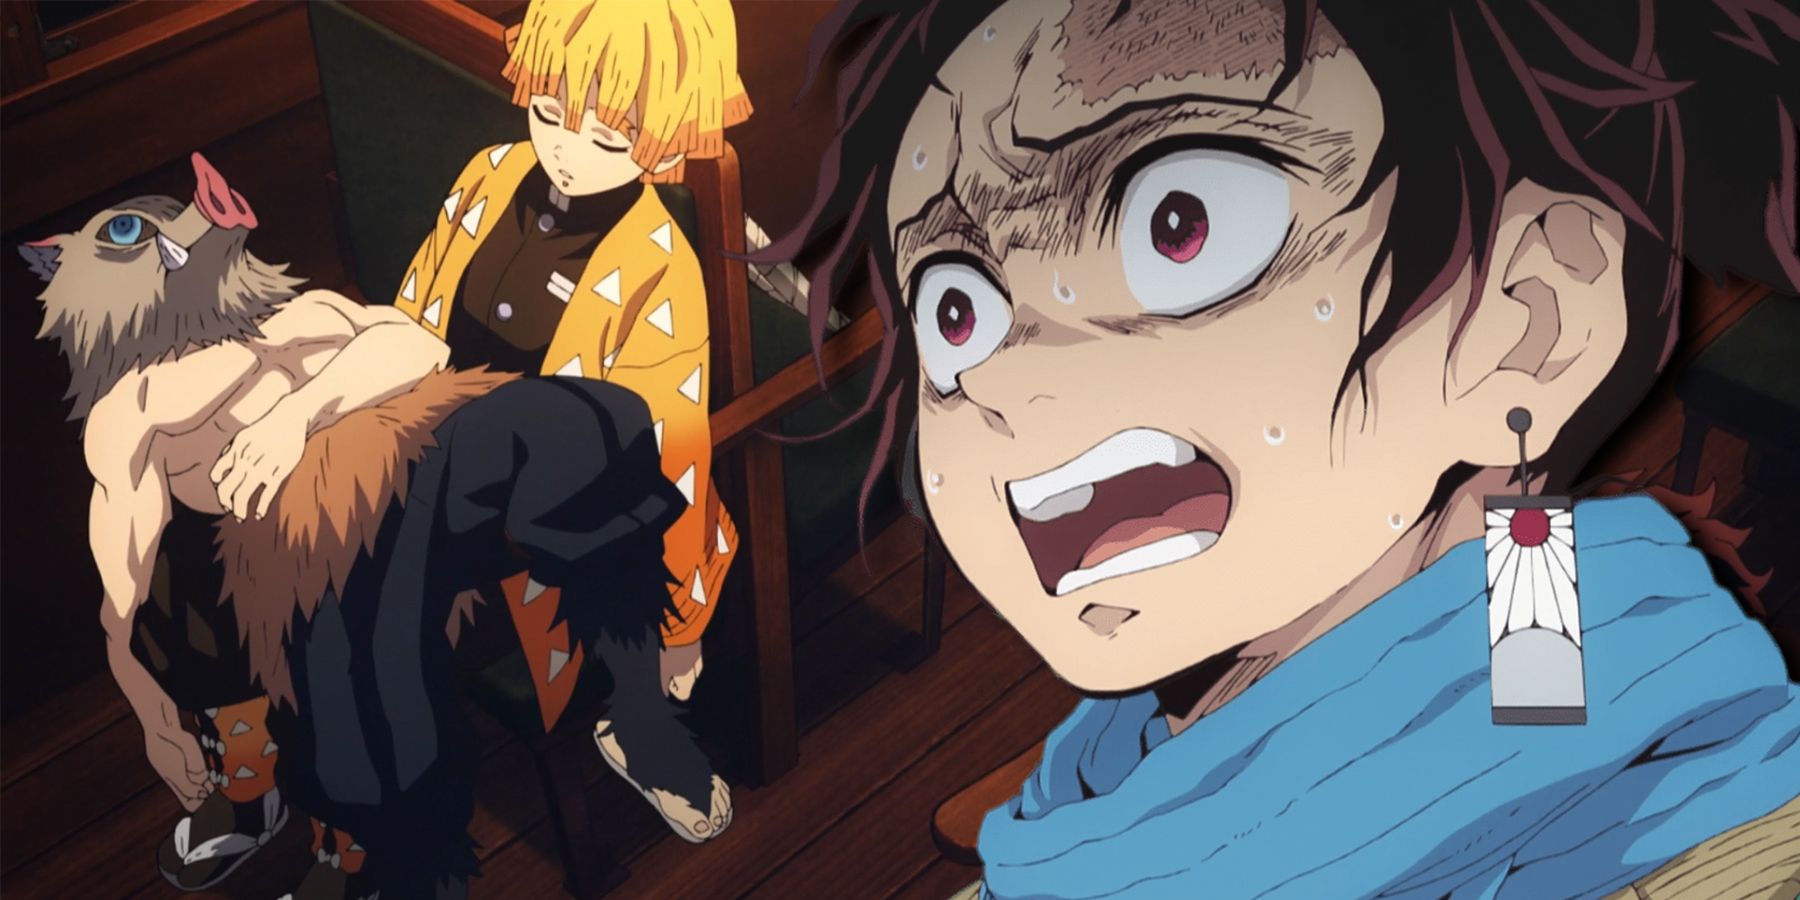 Demon Slayer season 2 blows the budget on another masterful episode